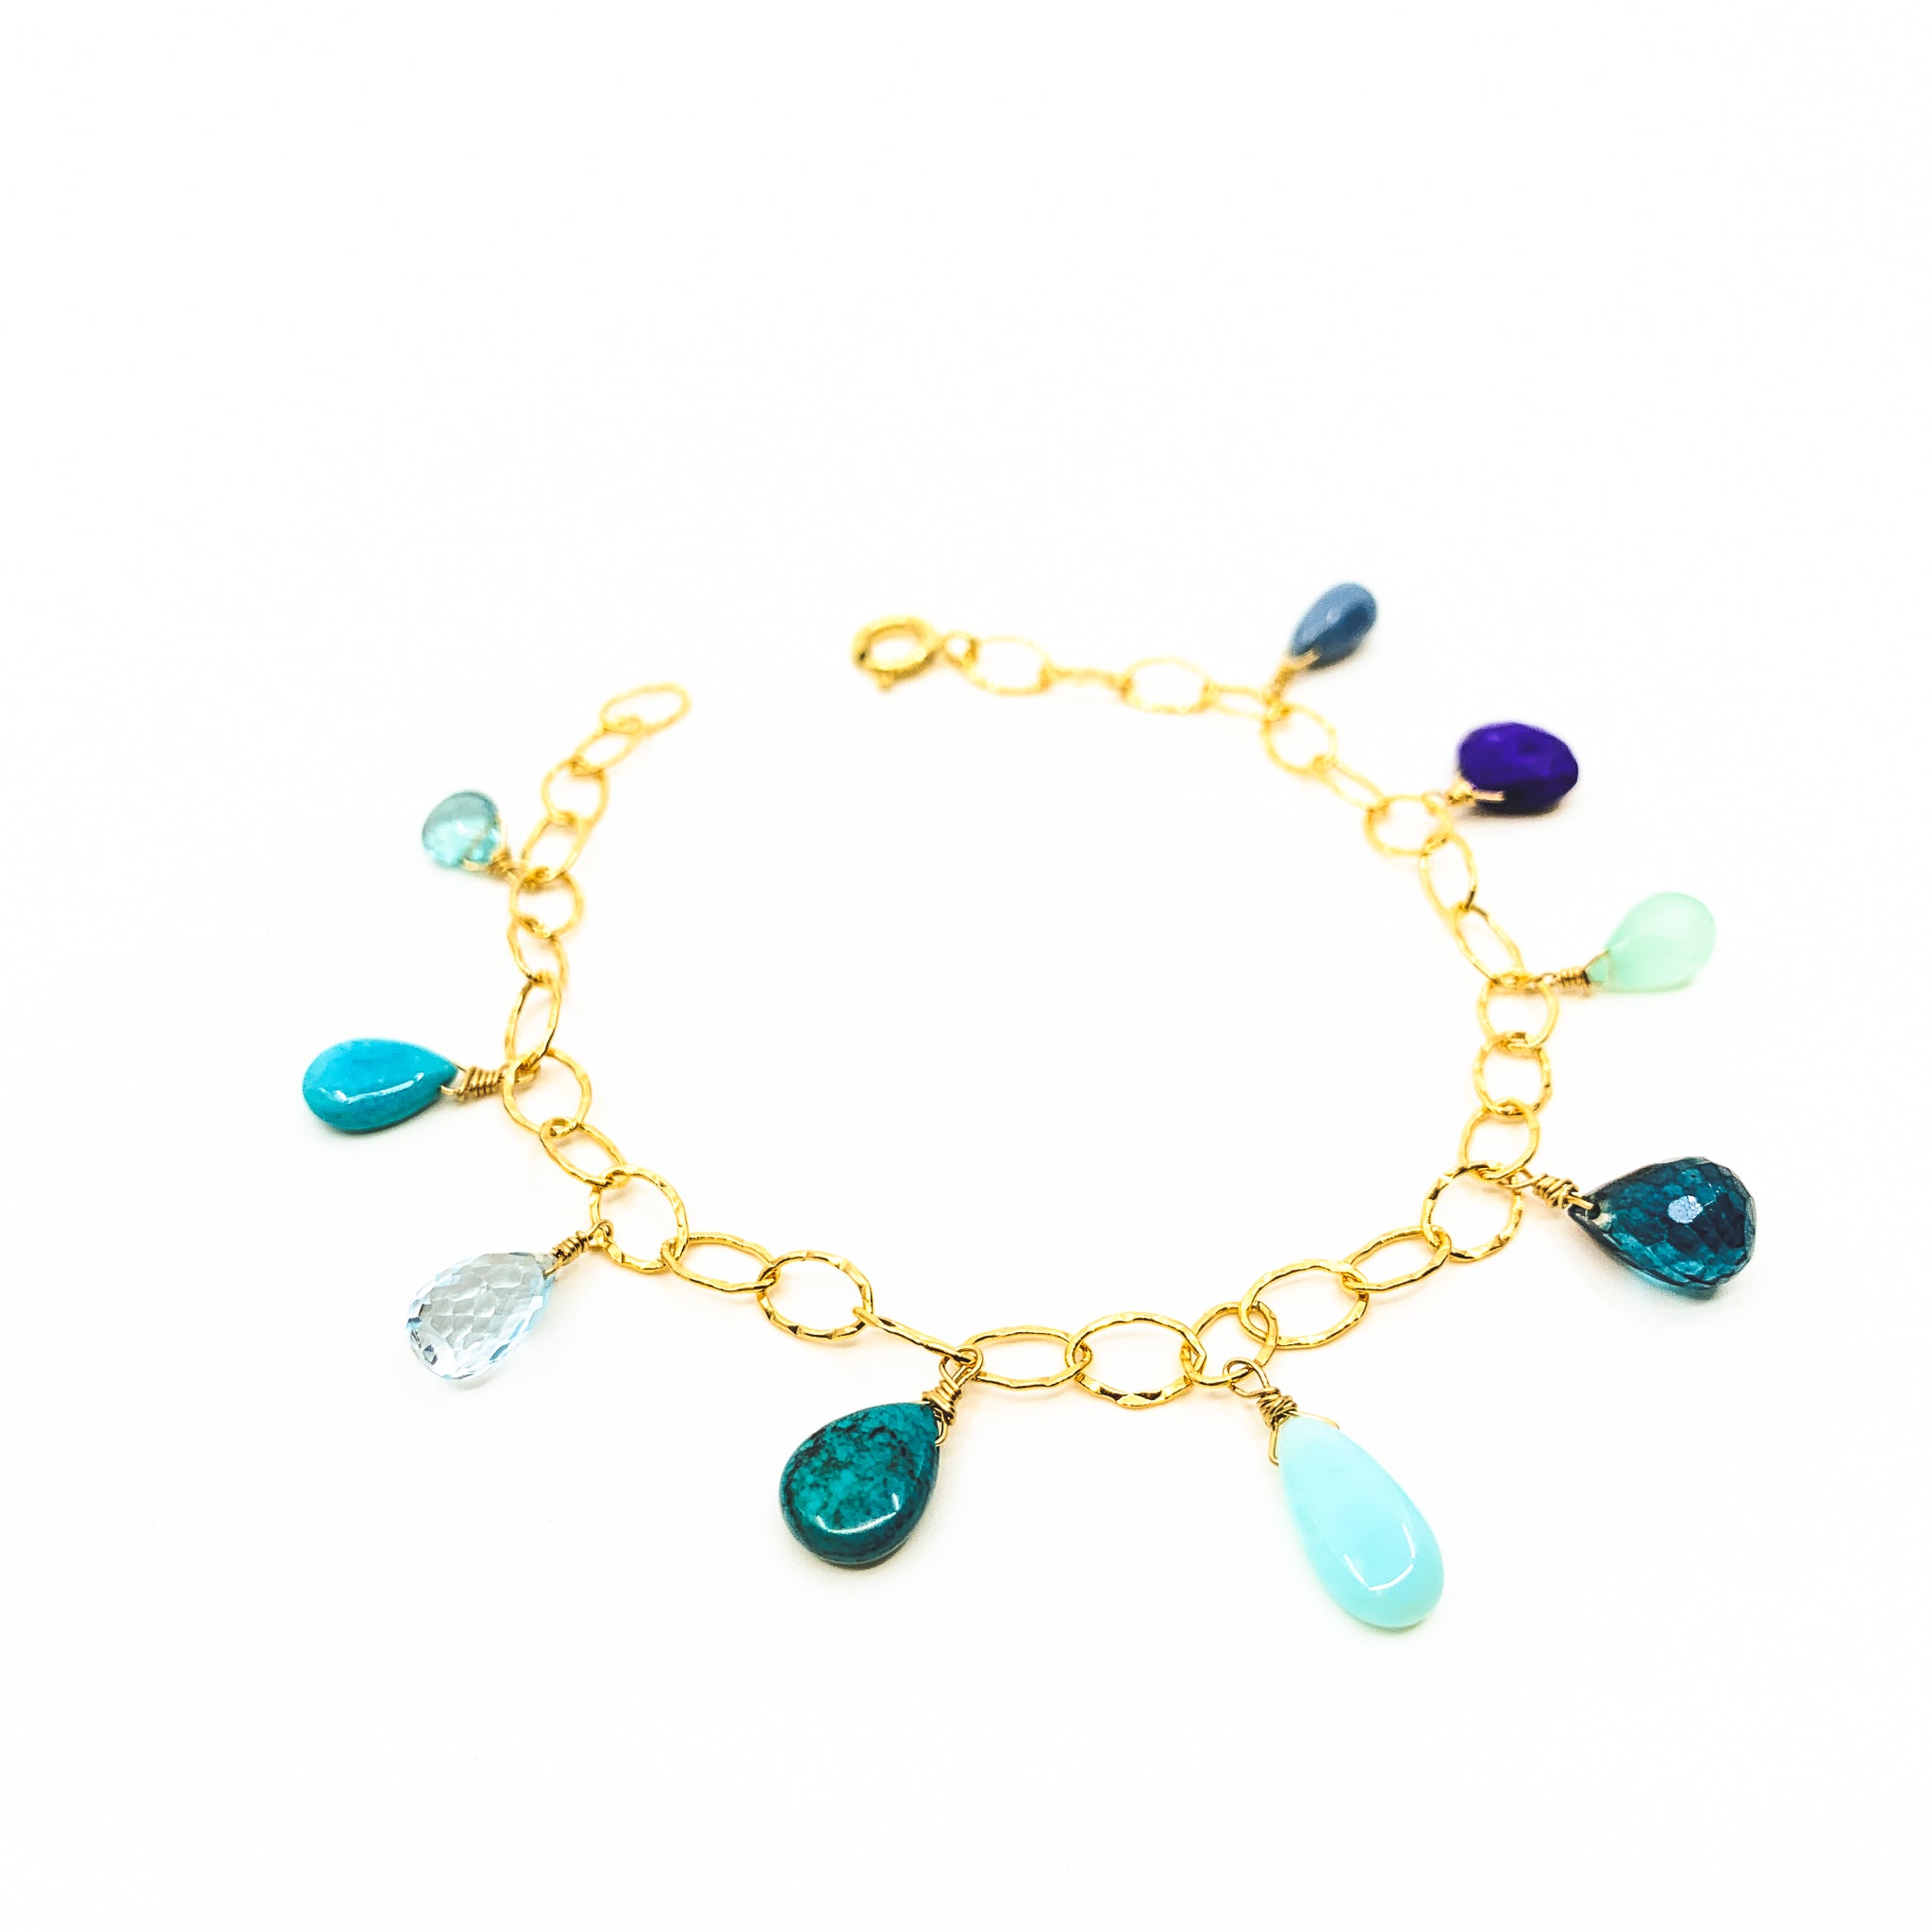 mixed blue gemstones gold charm bracelet by eve black jewelry made in hawaii  Edit alt text